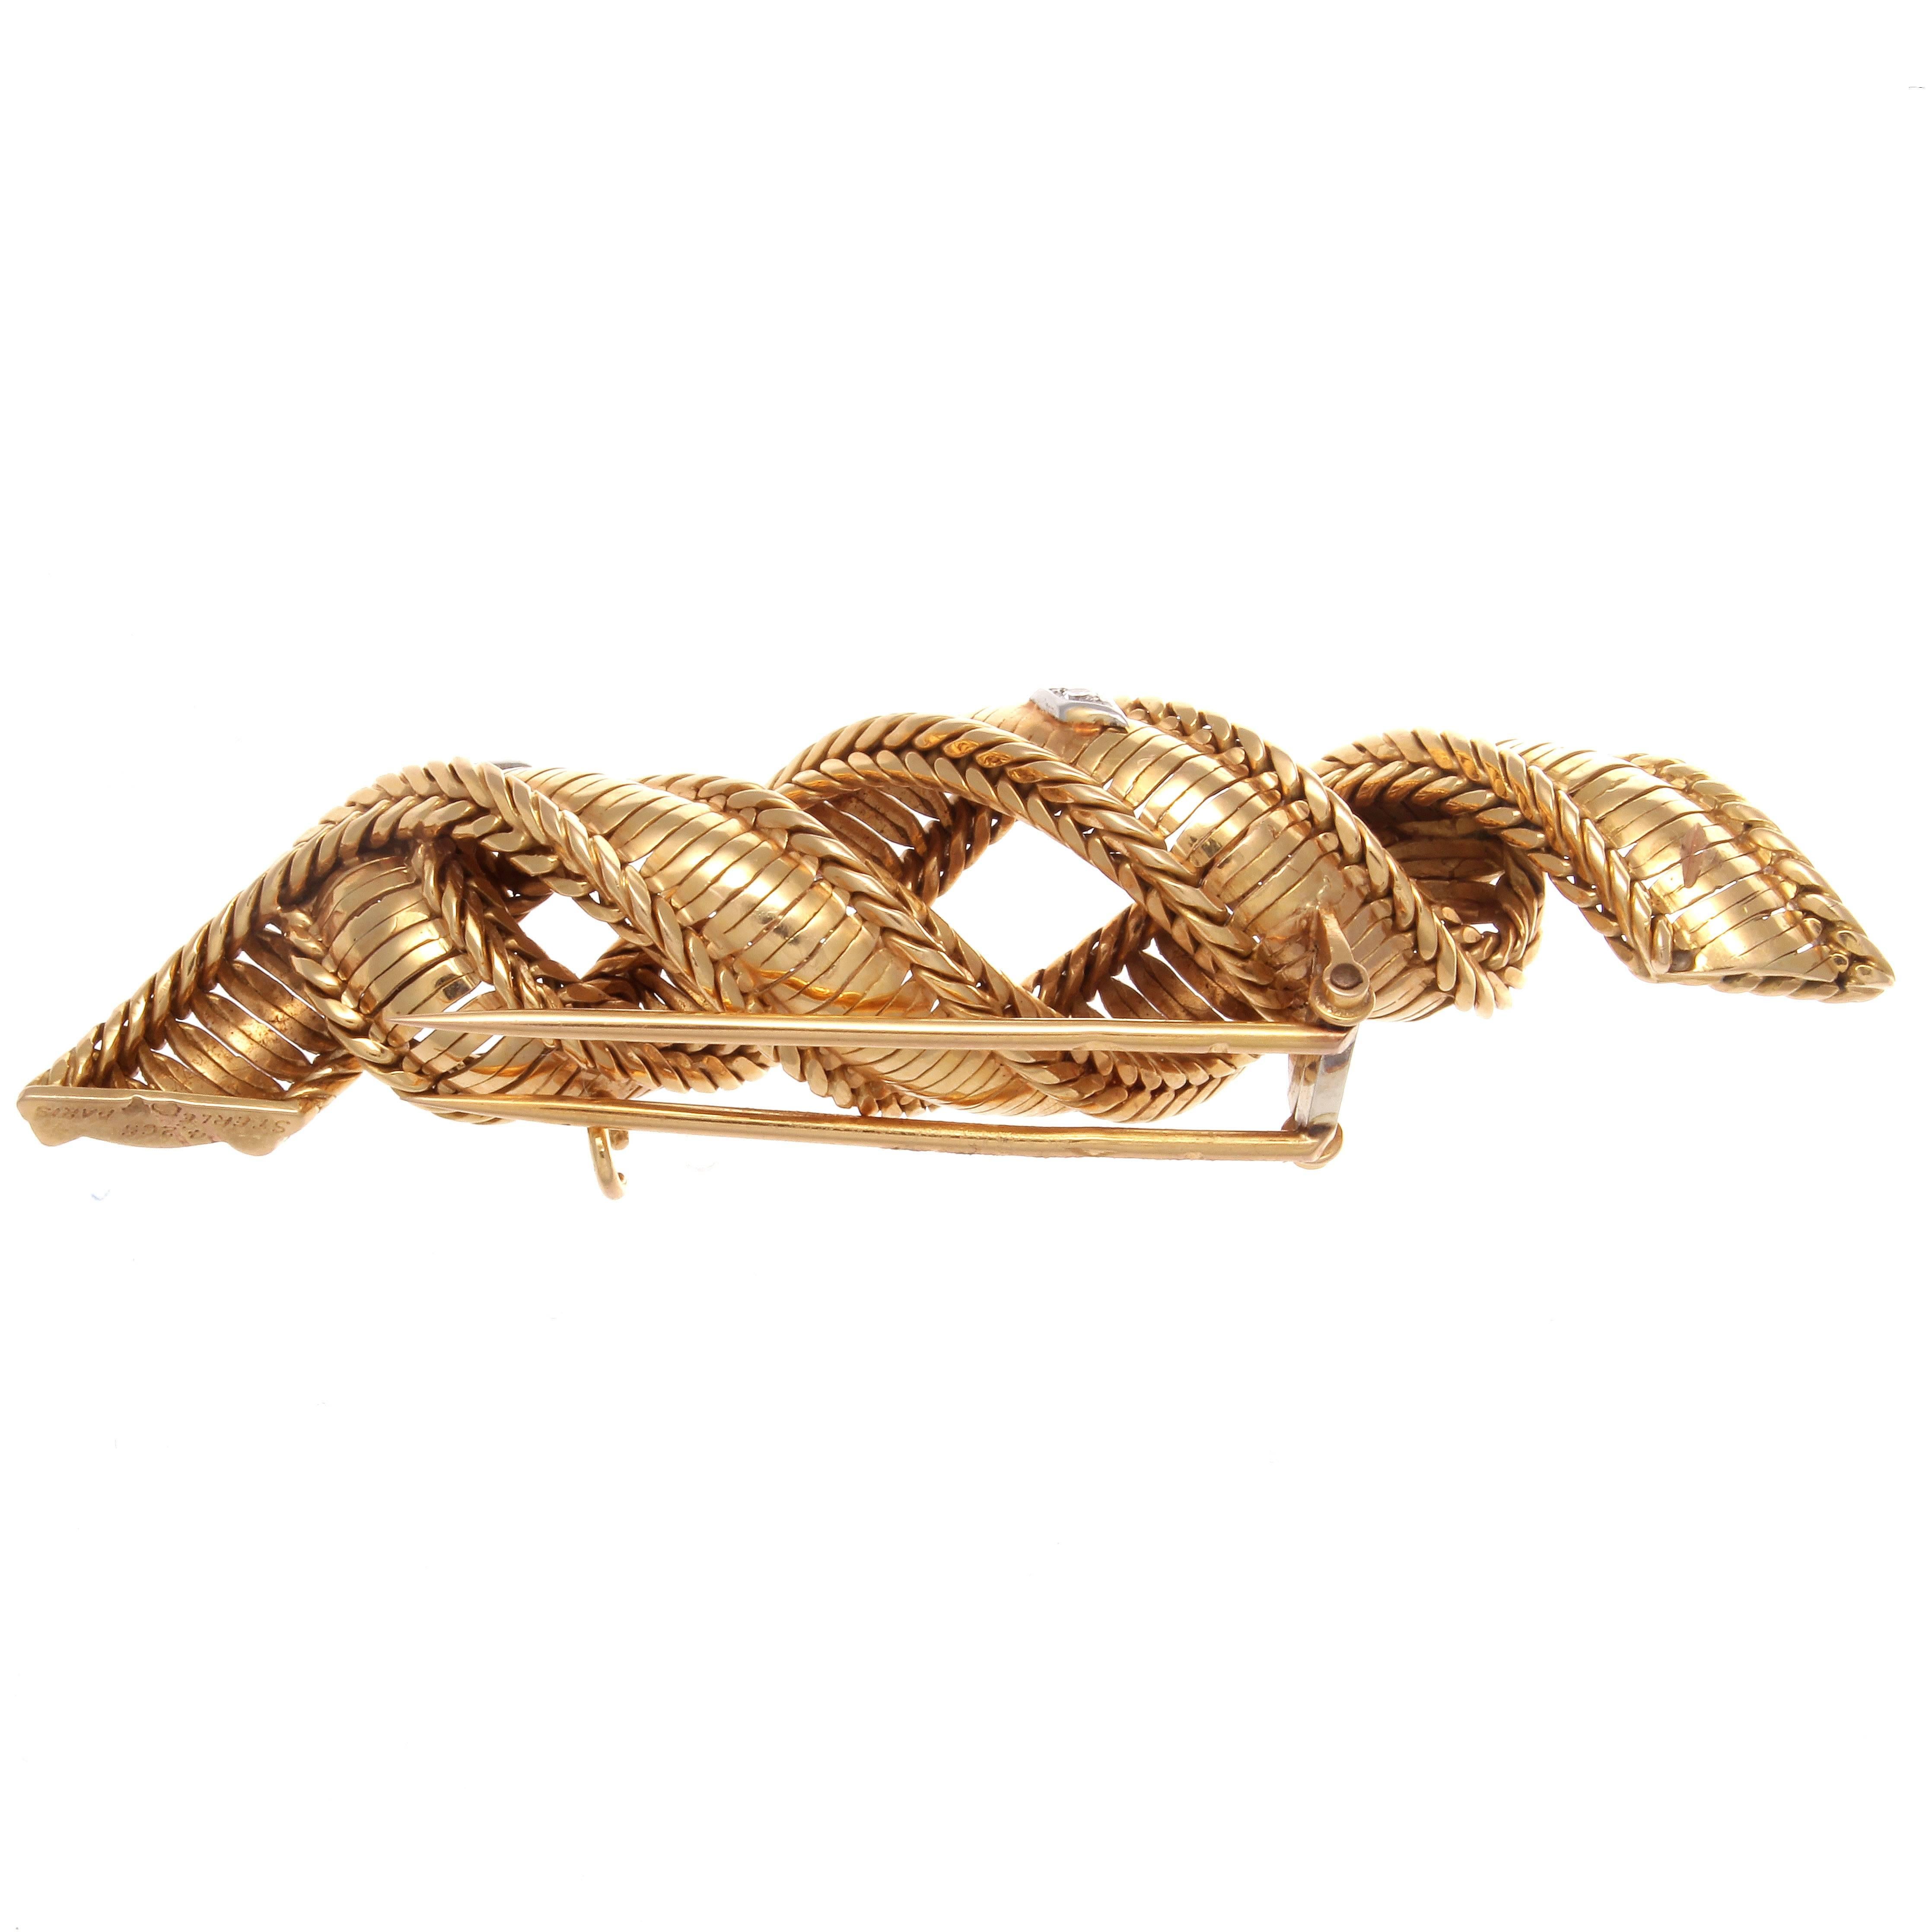 A continuum of excellence and style from Sterle Paris. The brooch is made of swirls of ribbon like braided gold containing 4 symmetrically placed white diamonds. Signed Sterle Paris with French hallmarks. In 18k gold.

3 inches long and 5/8 inches